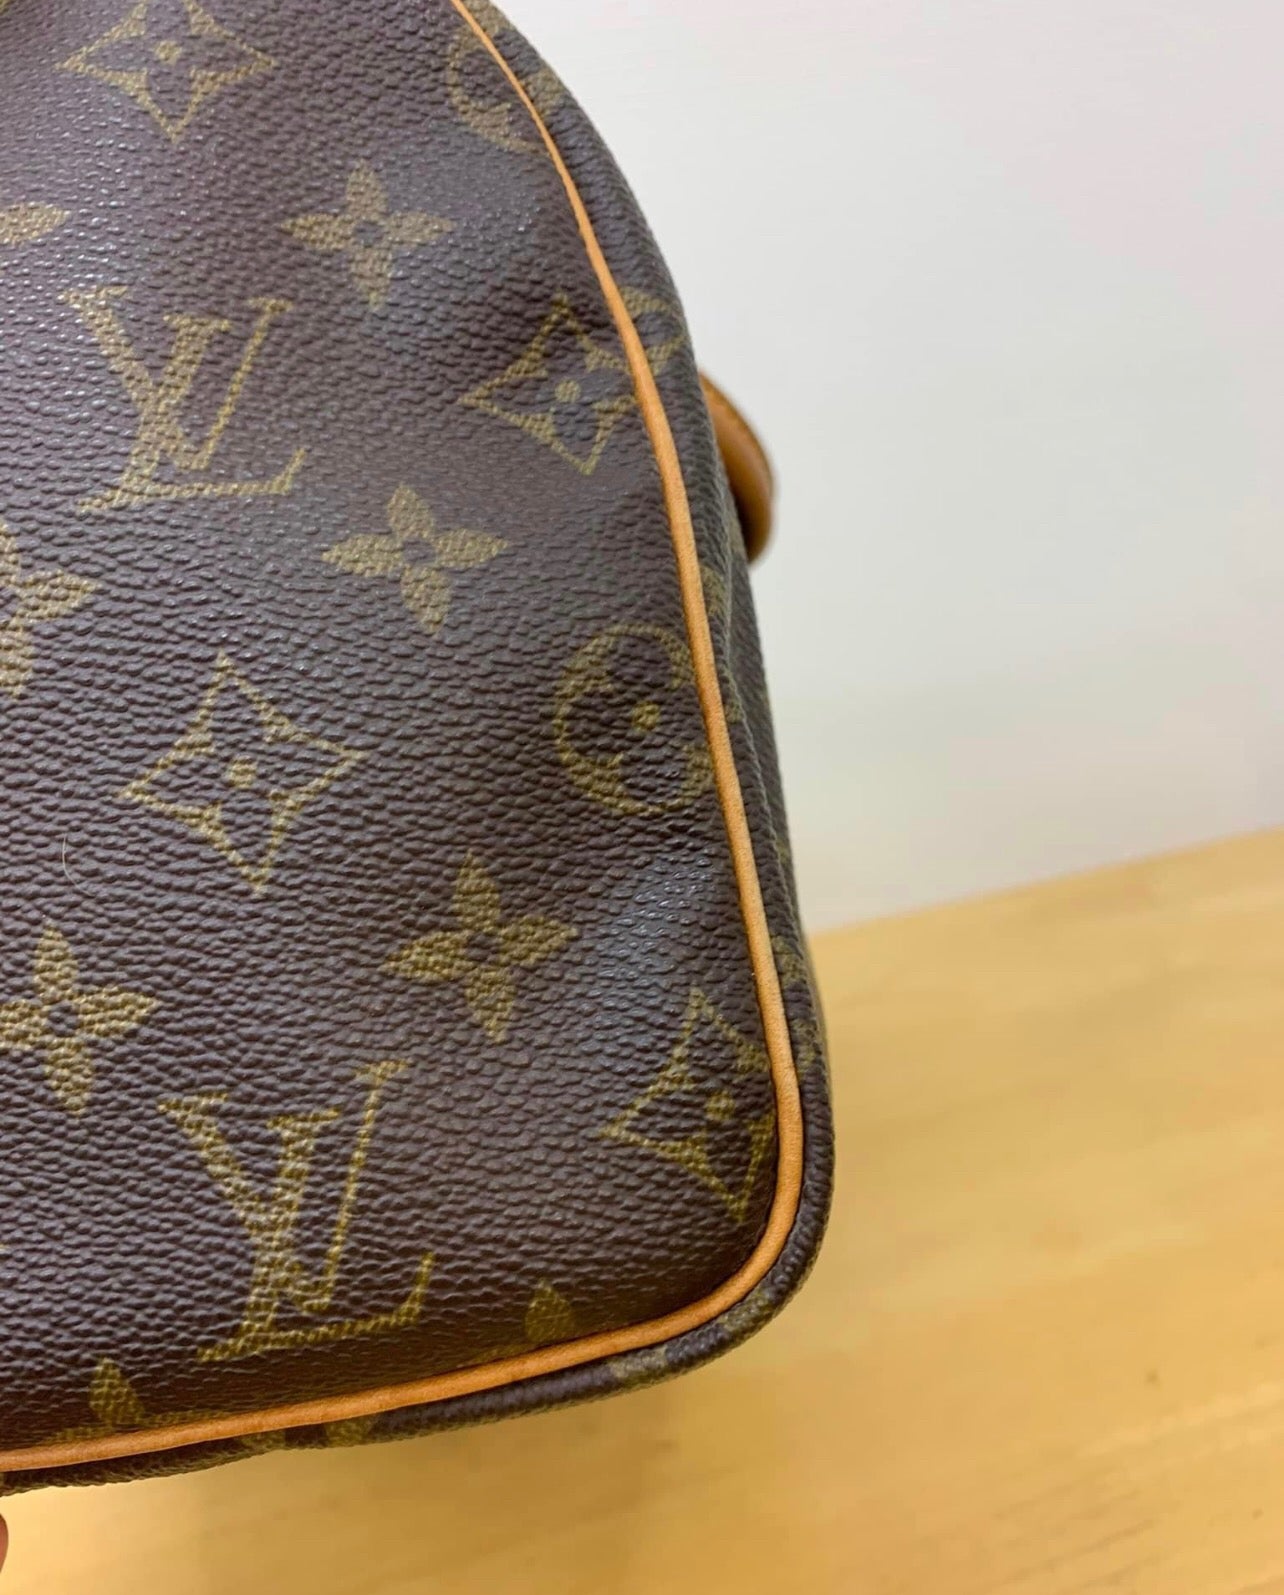 Vintage Gypsy redesigned authentic Louis Vuitton